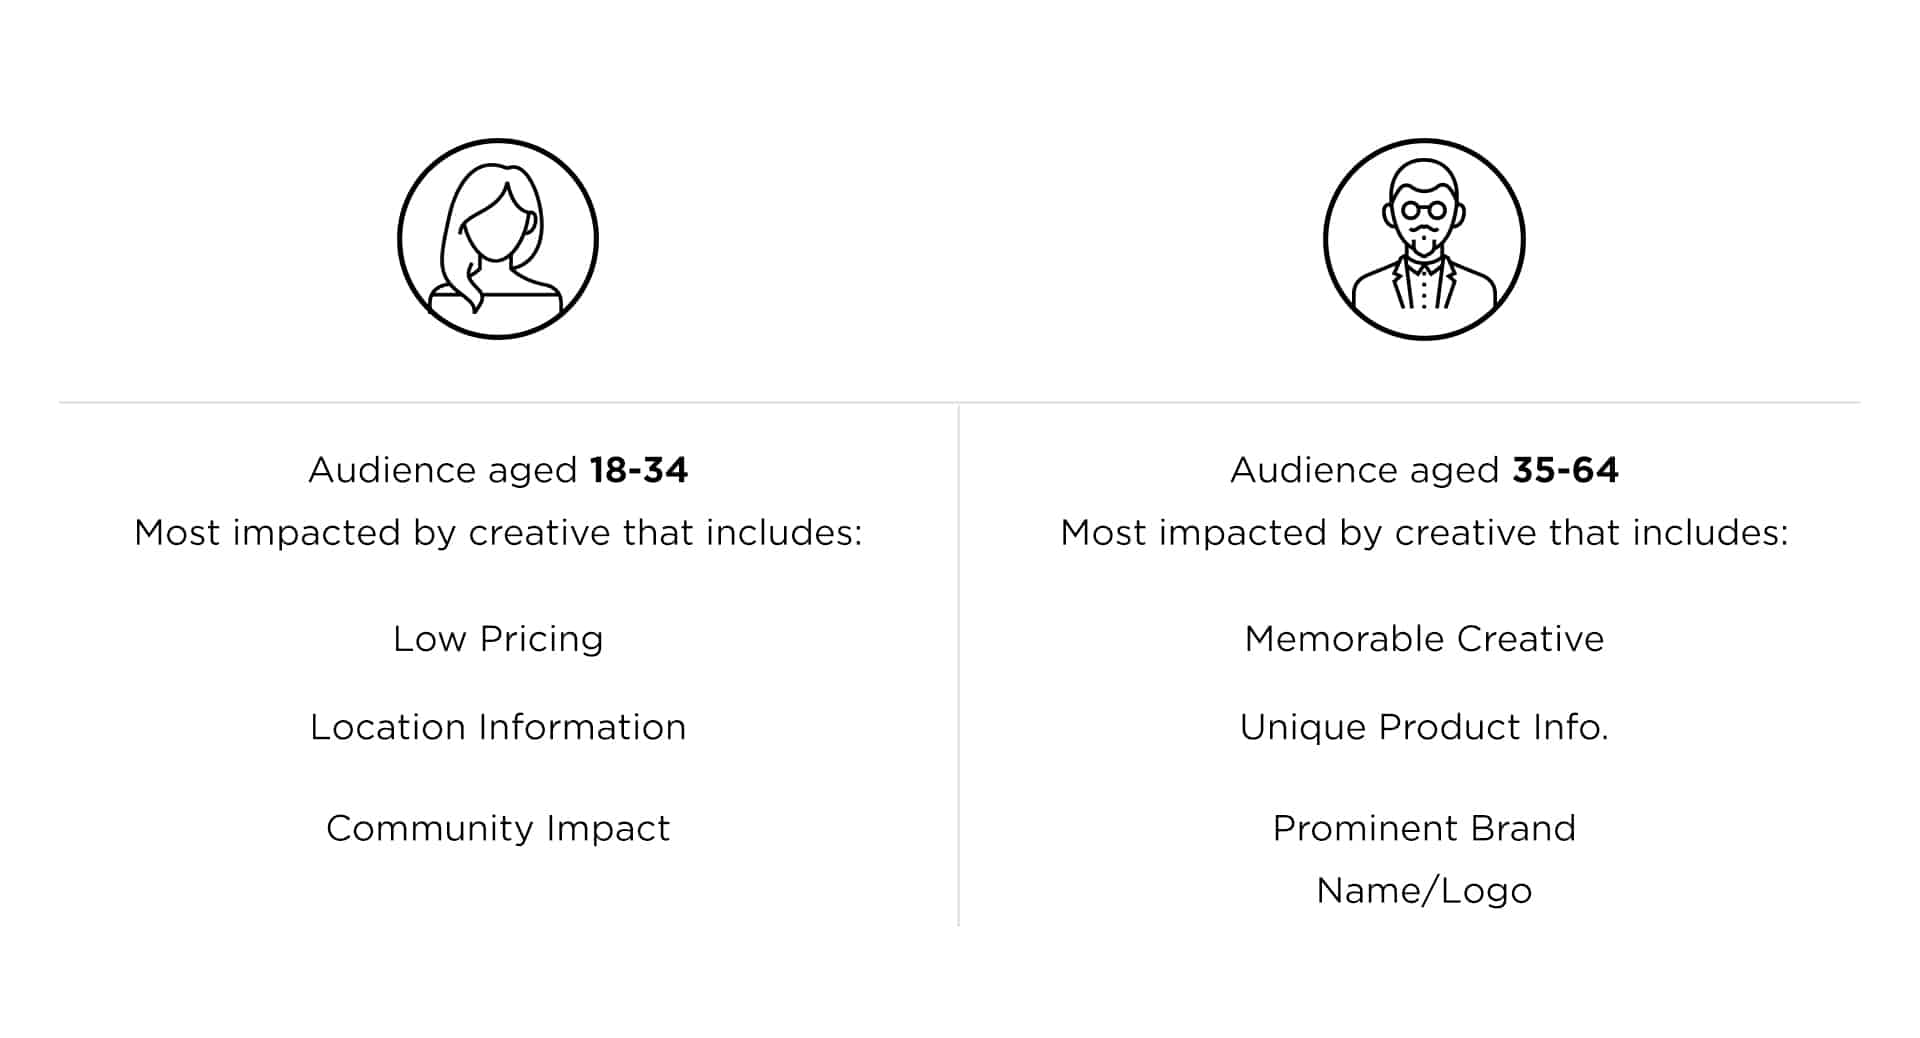 Younger audiences respond to messaging that includes low pricing, location information, & community impact. Older audiences are most impacted by memorable creative, unique product info, & a brand name or logo.